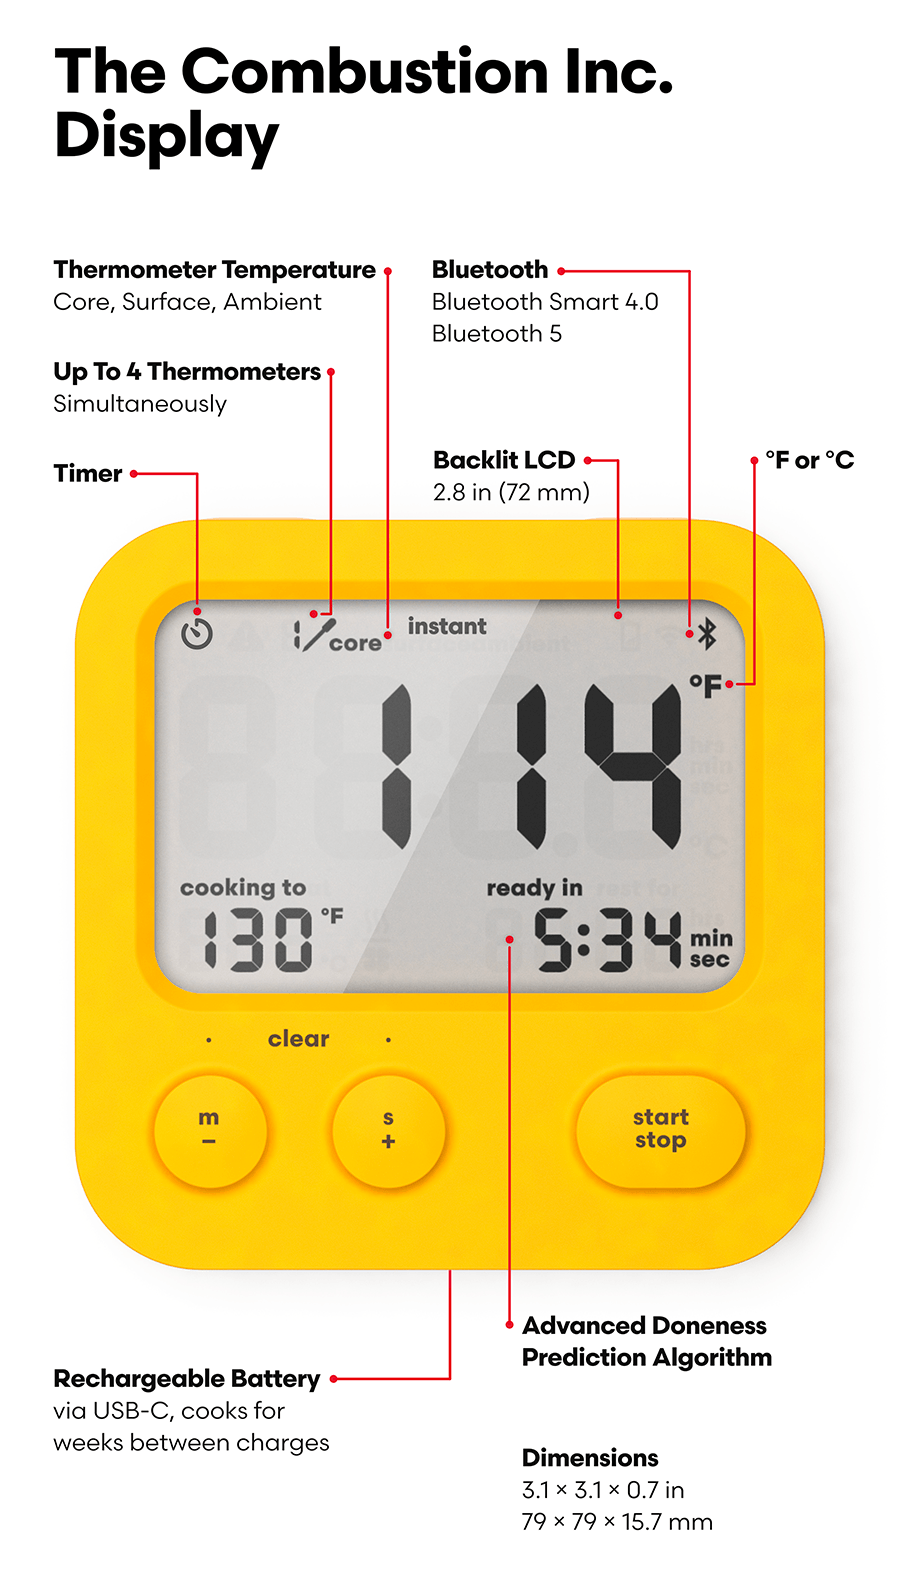  Combustion Display — for use with Eight-Sensor Combustion  Predictive Thermometer — Rugged Timer/Controller - Boosts Bluetooth Signal  - Shows Temps, Predictions - Counts Down Cooking Time Remaining : Home &  Kitchen